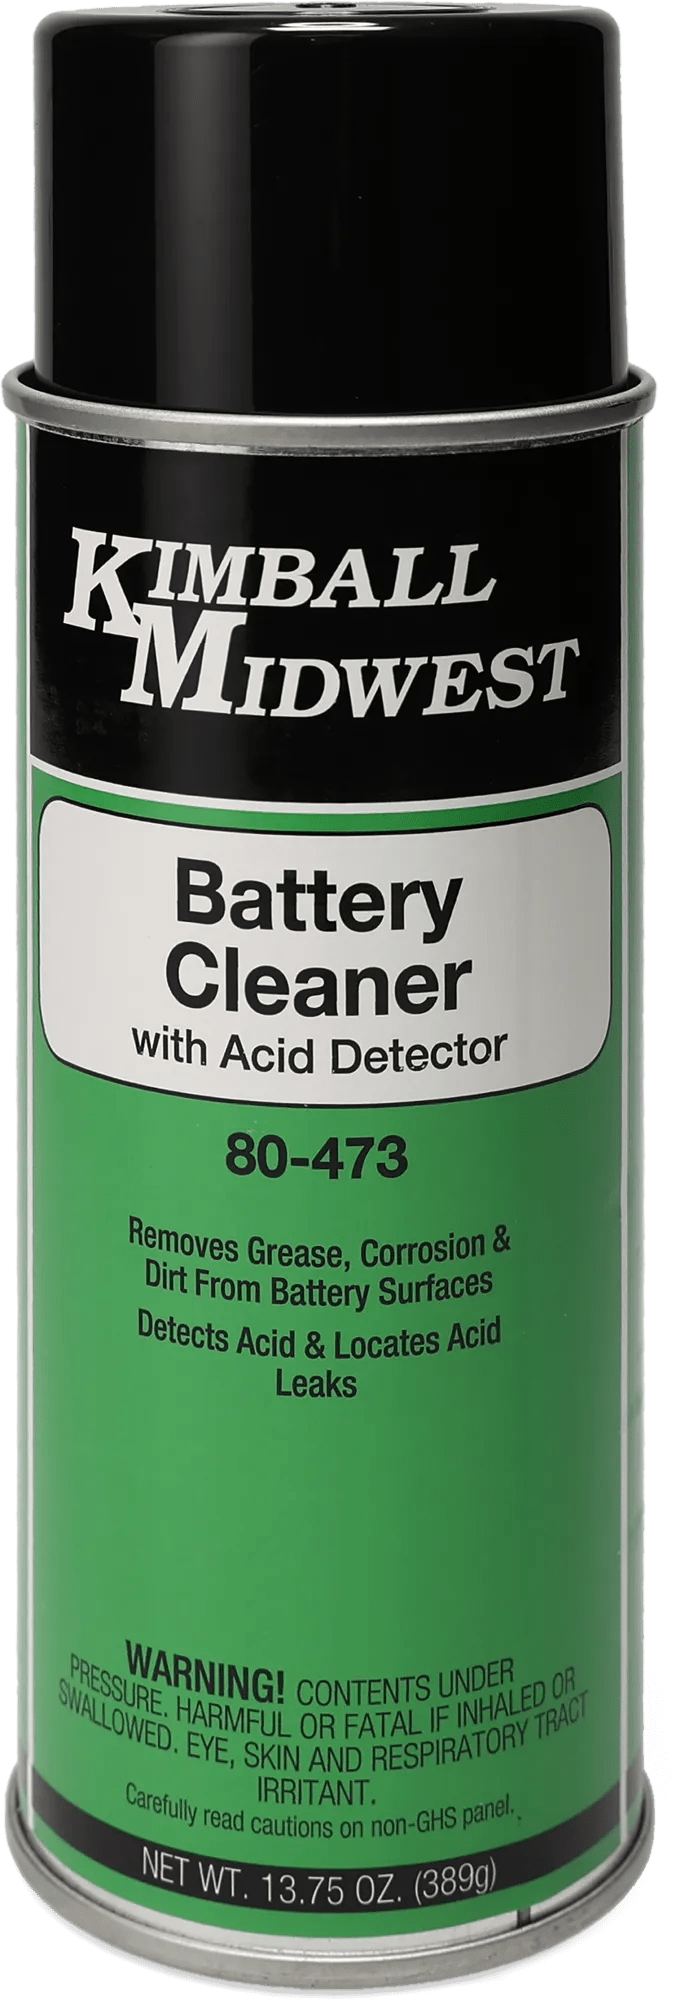 Battery Cleaner with Acid Detector